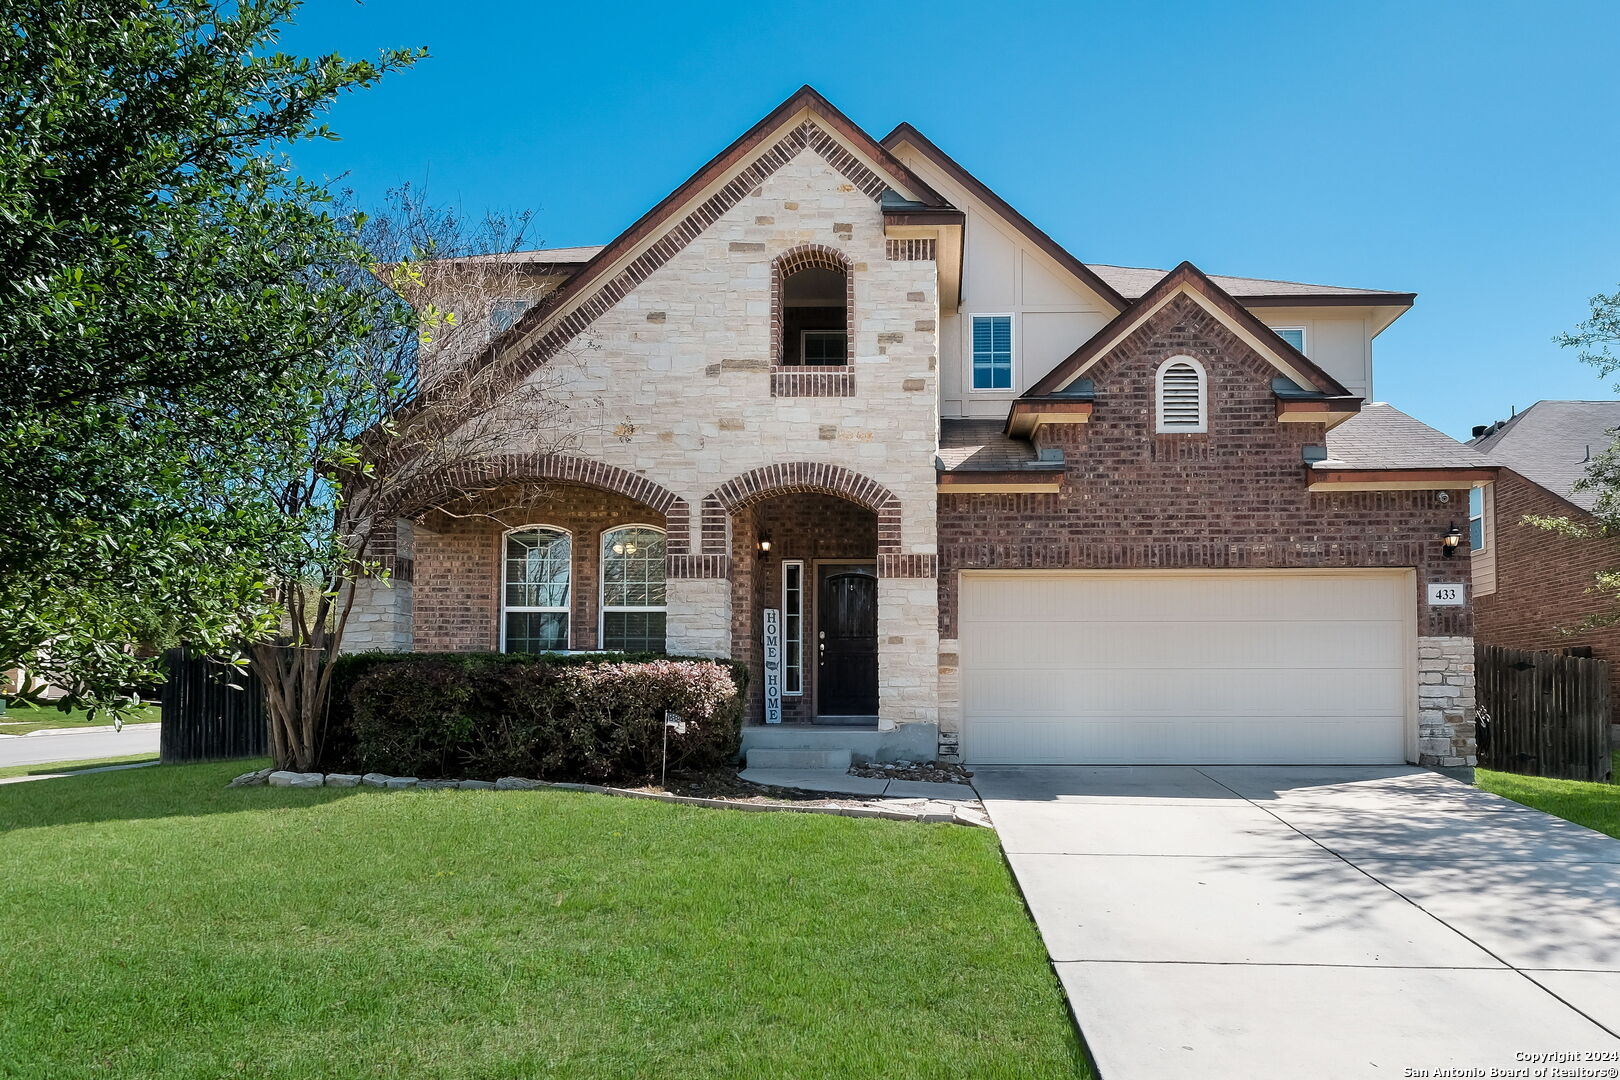 Photo of 433 Bison Ln in Cibolo, TX